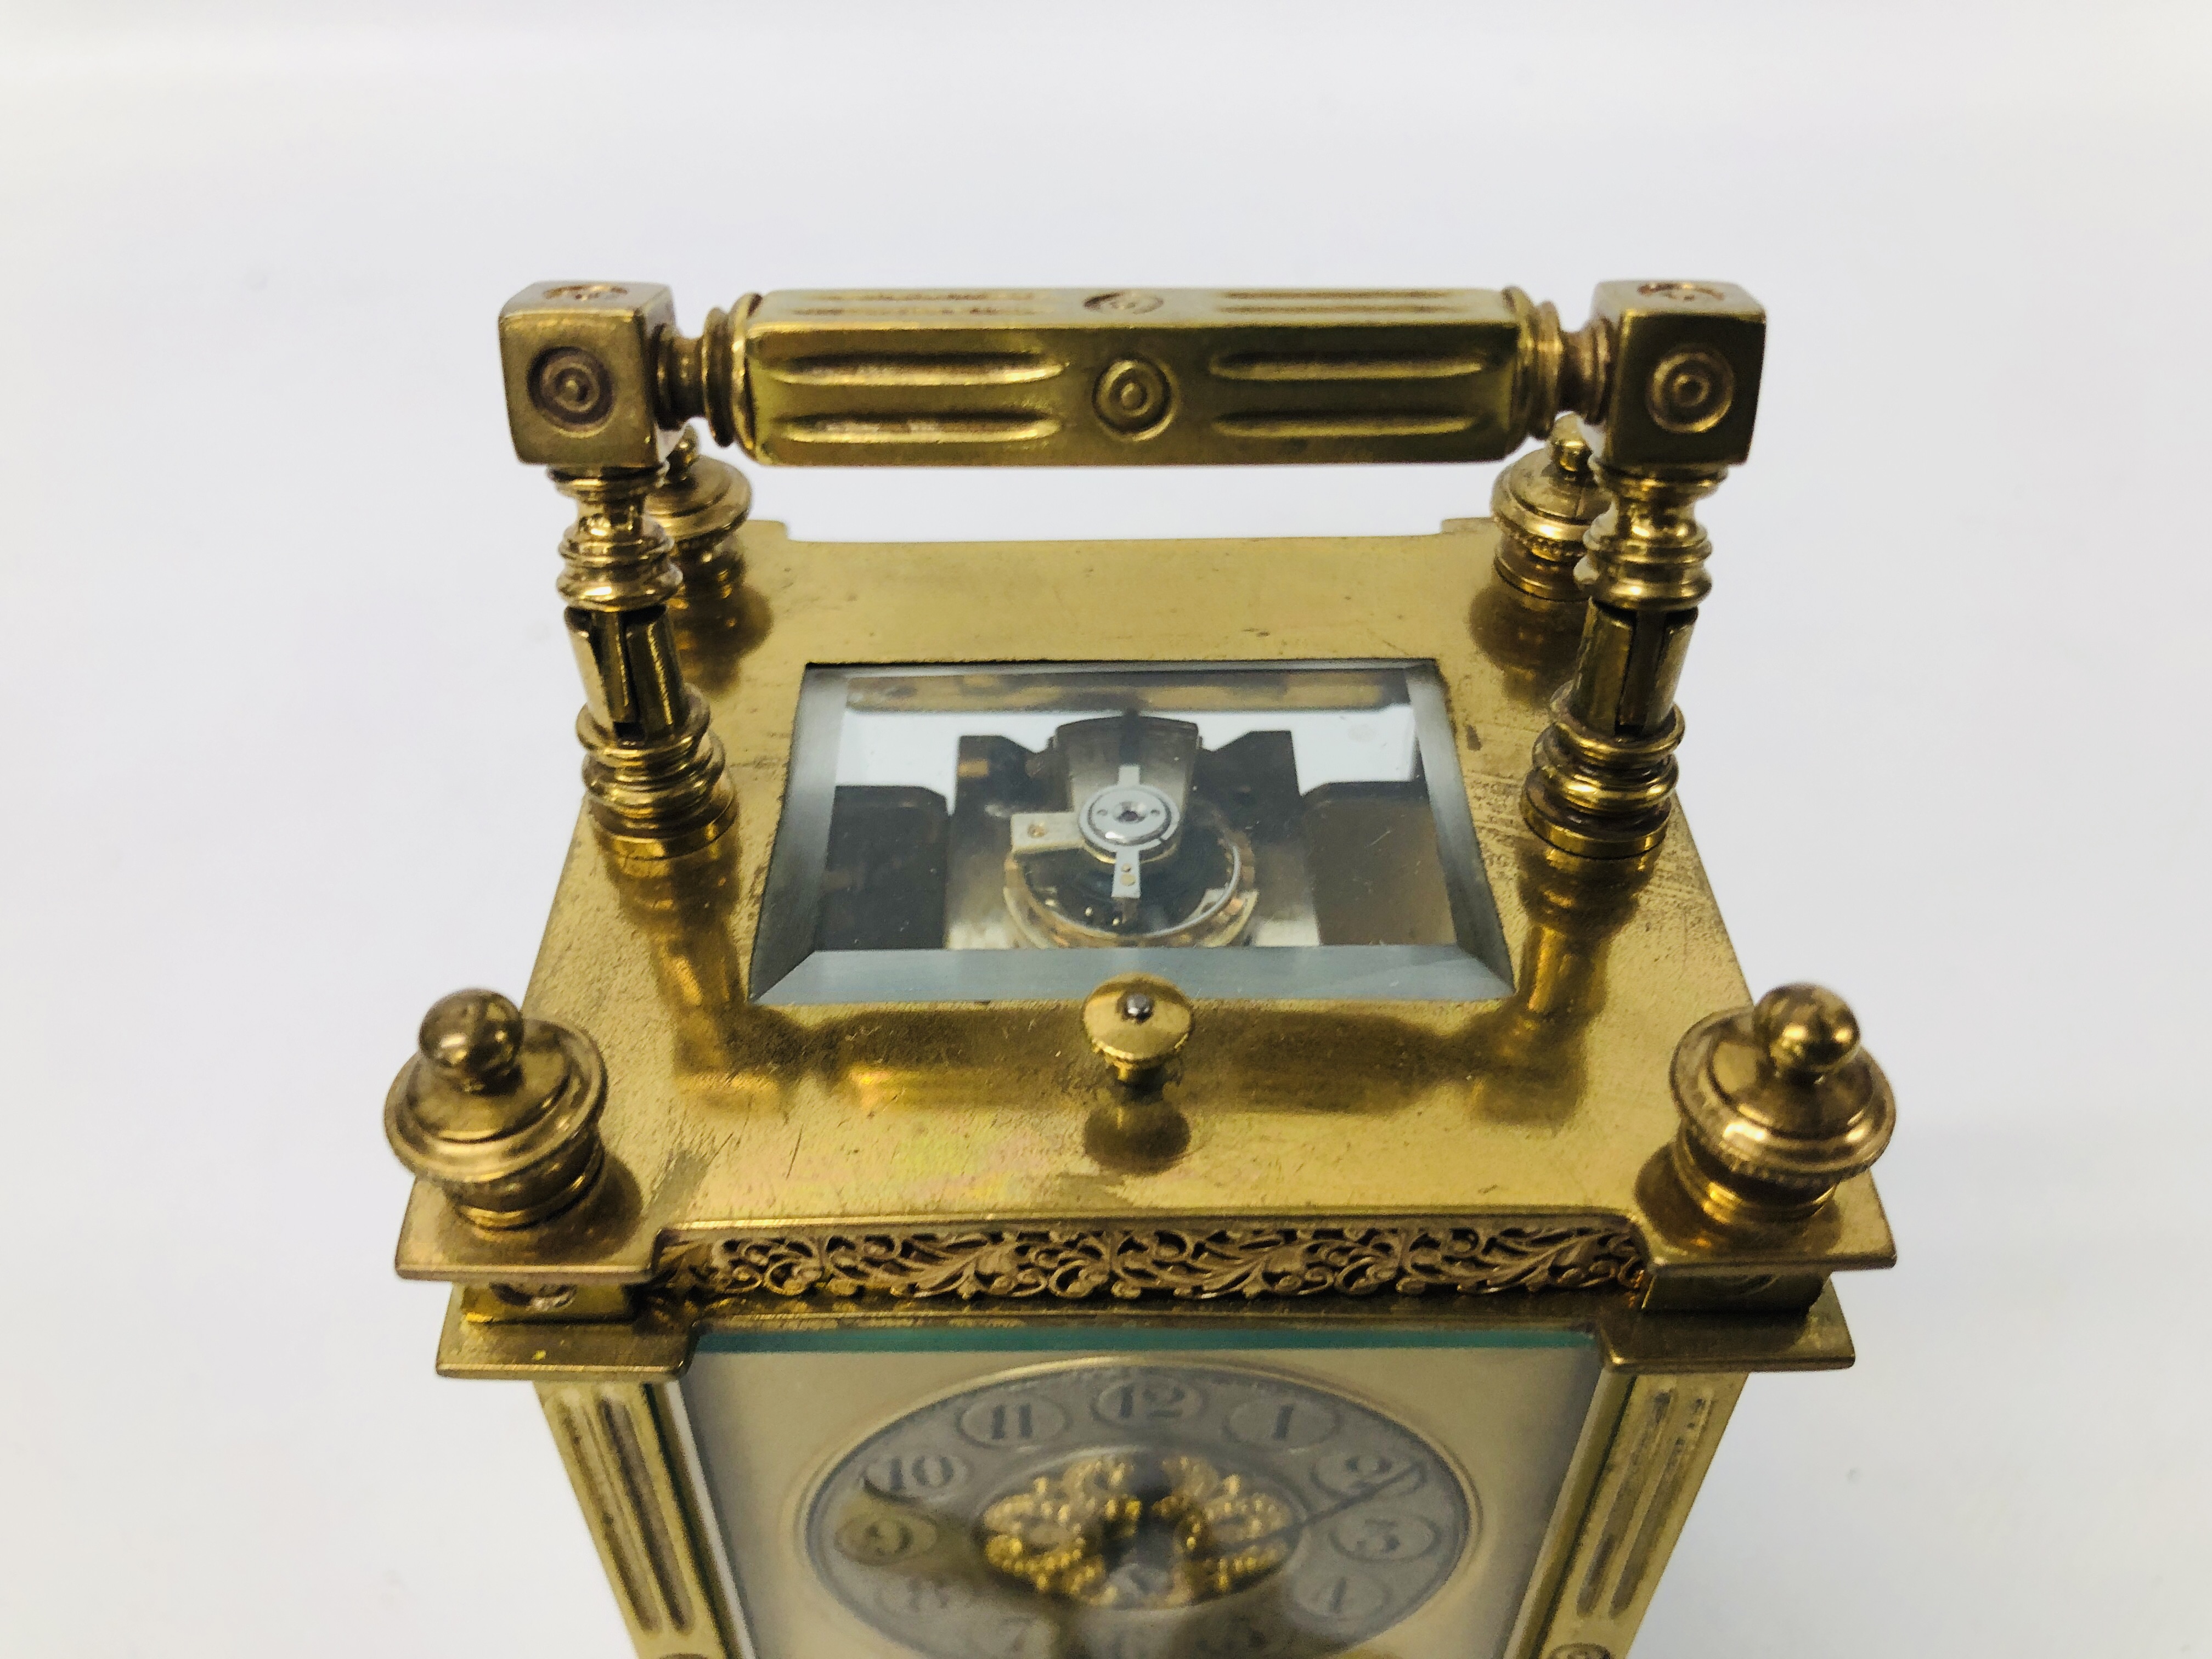 A FRENCH CARRIAGE CLOCK RETAILED BY MAPPIN & WEBB, THE SILVERED CHAPTER RING WITH ENGLISH NUMERALS, - Image 5 of 8